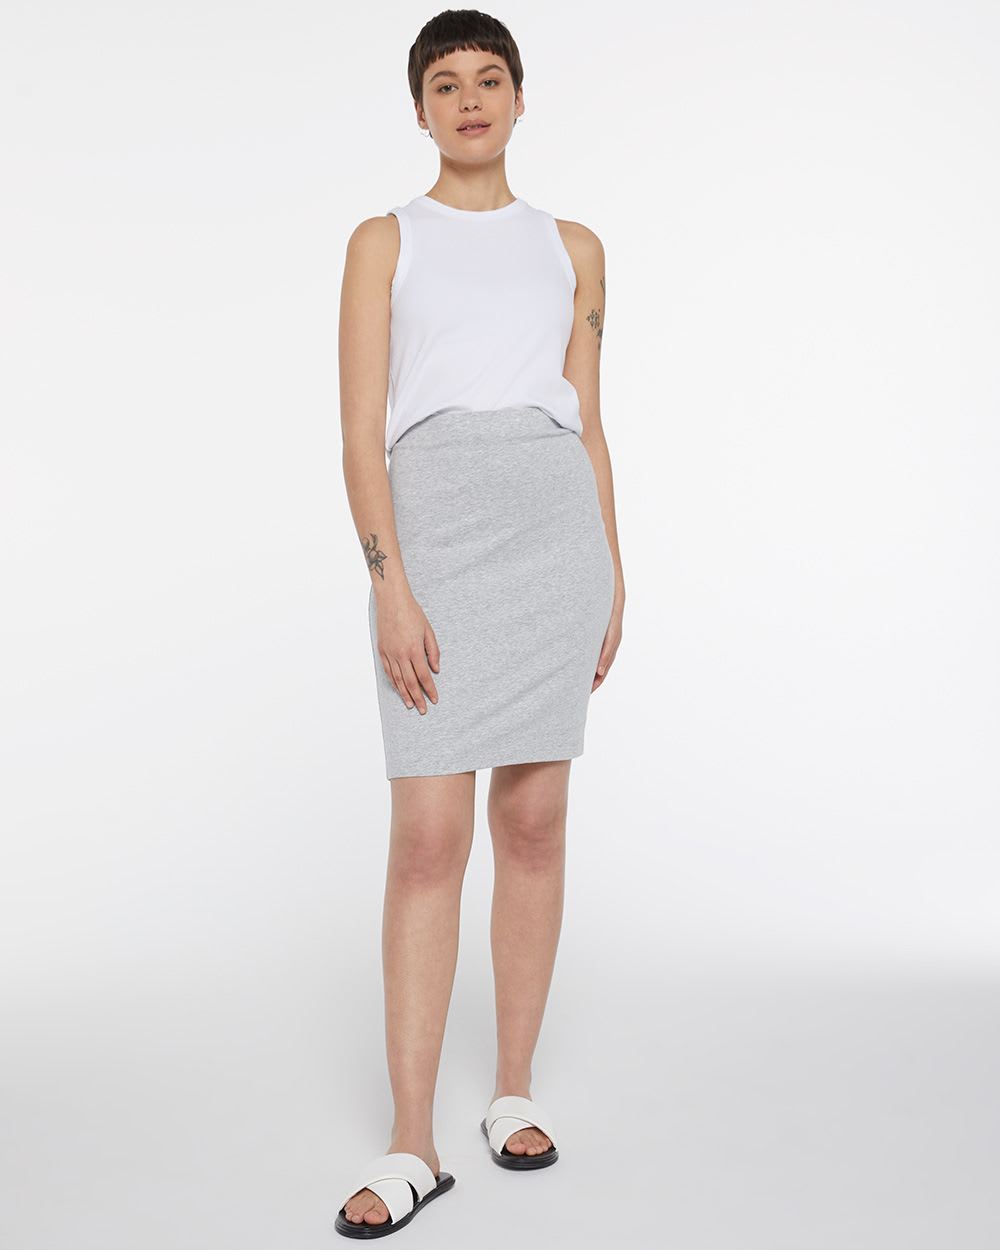 Solid Pull-On Pencil Skirt